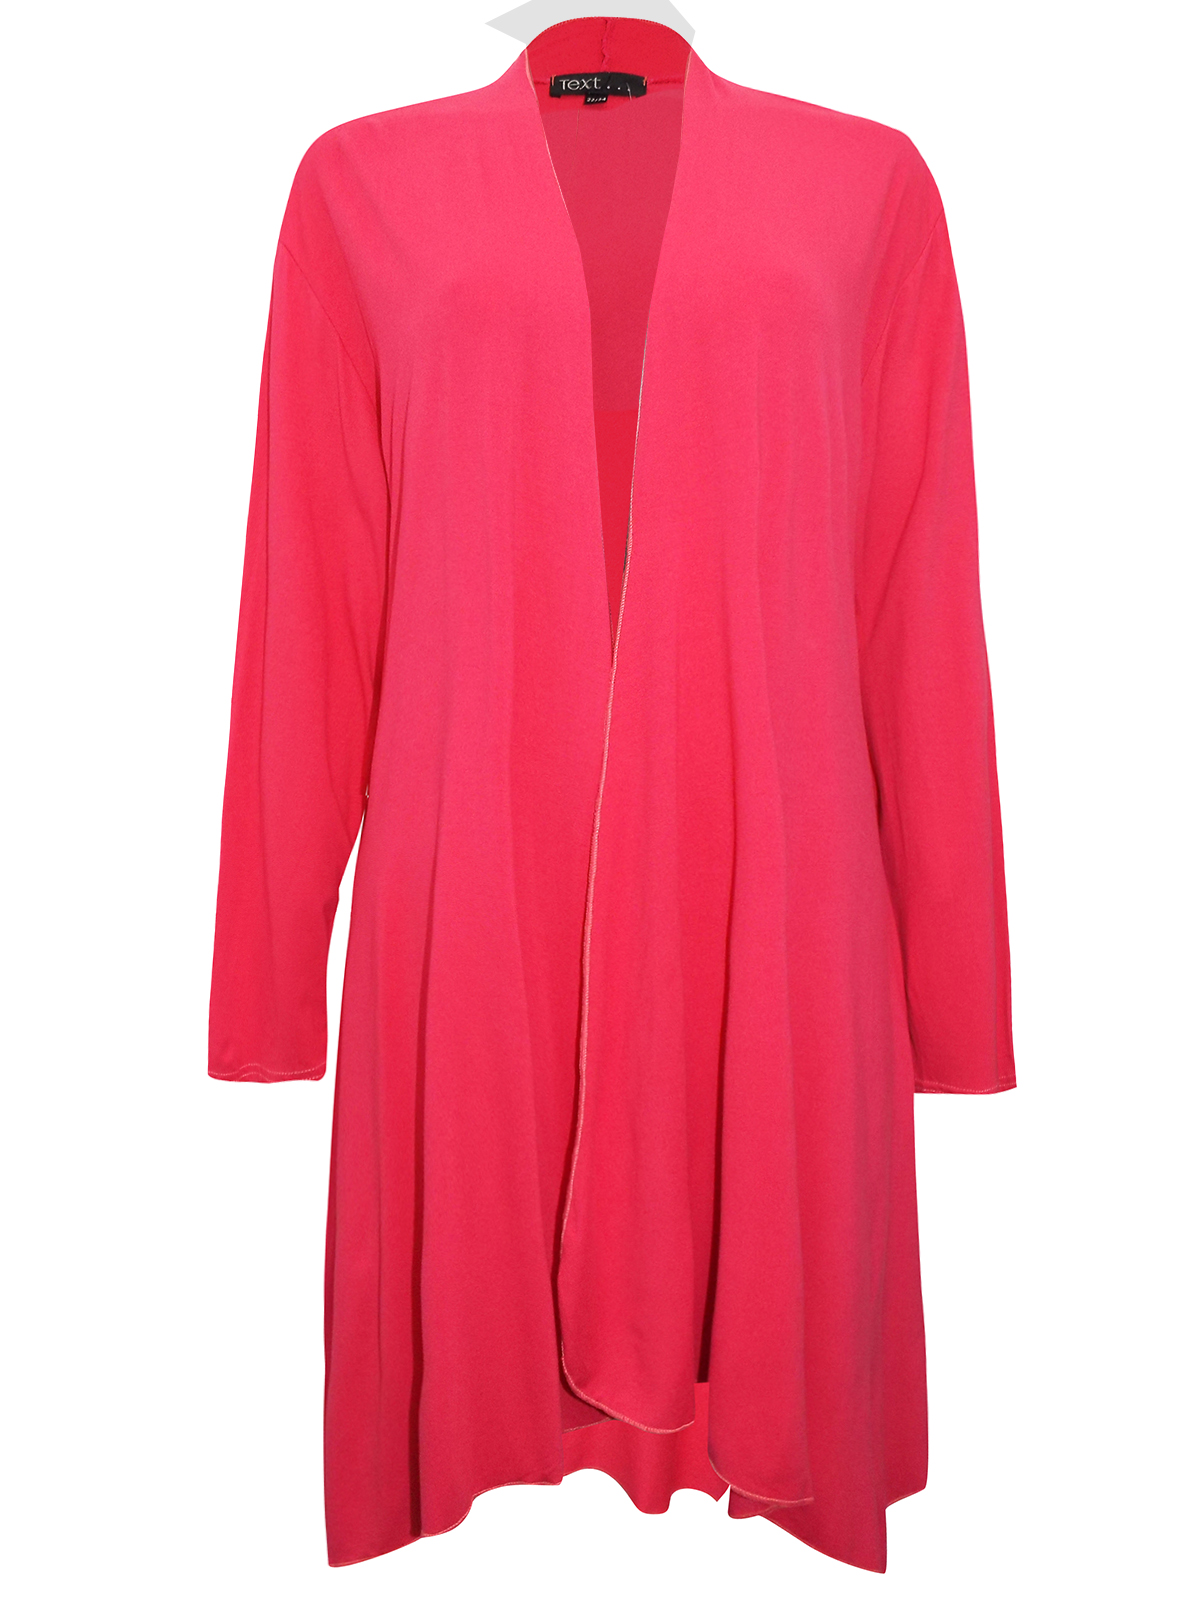 //text.. - - HOT-PINK Open Front Long Sleeve Jersey Cardigan - Plus ...